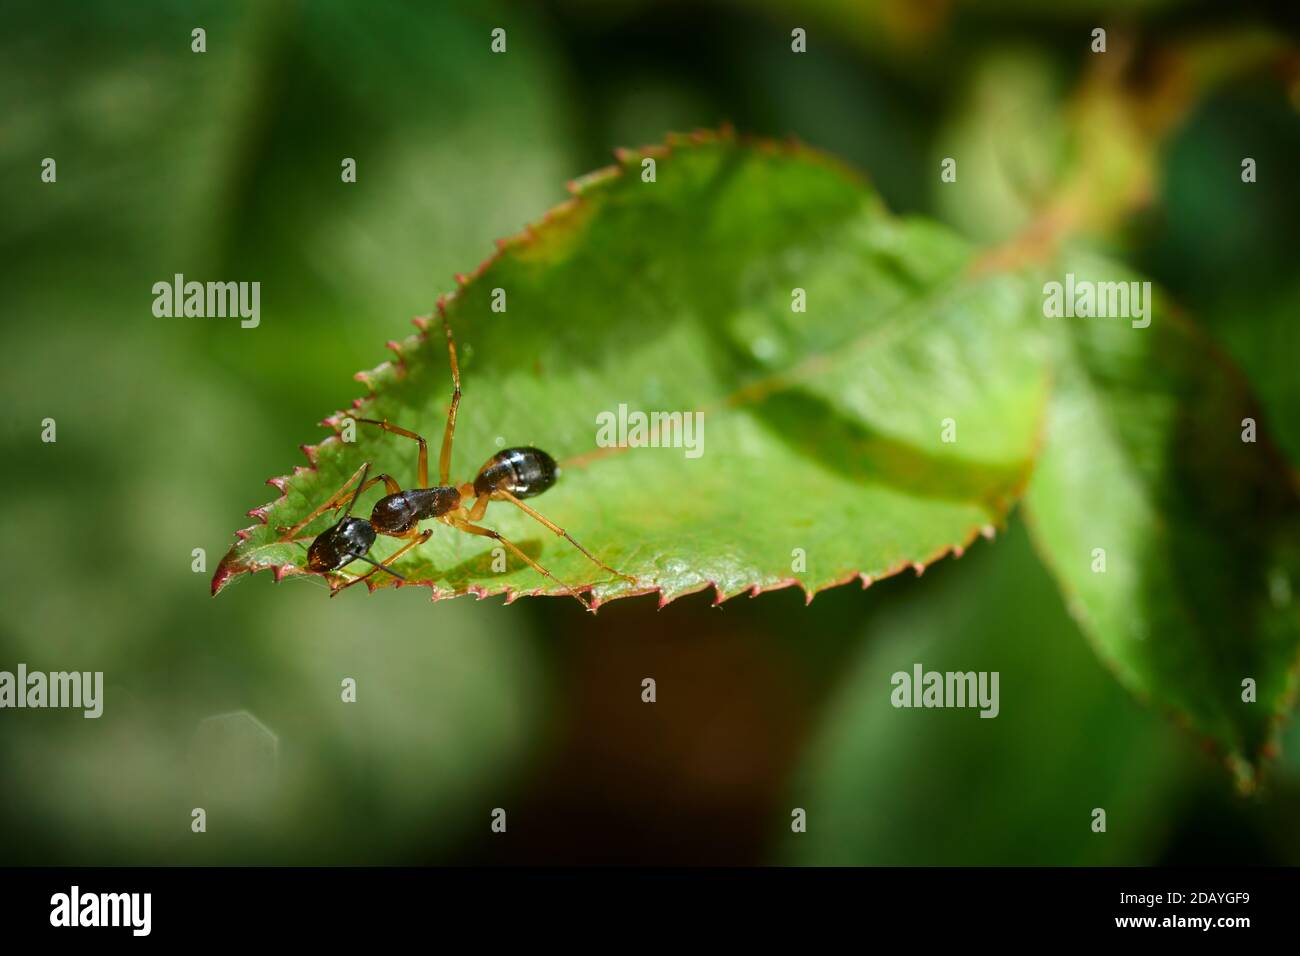 Closeup of a Sugar Ant on a rose leaf. The ant appeared to be collecting dew excreted by aphids on a rose bud above the ants position. Stock Photo